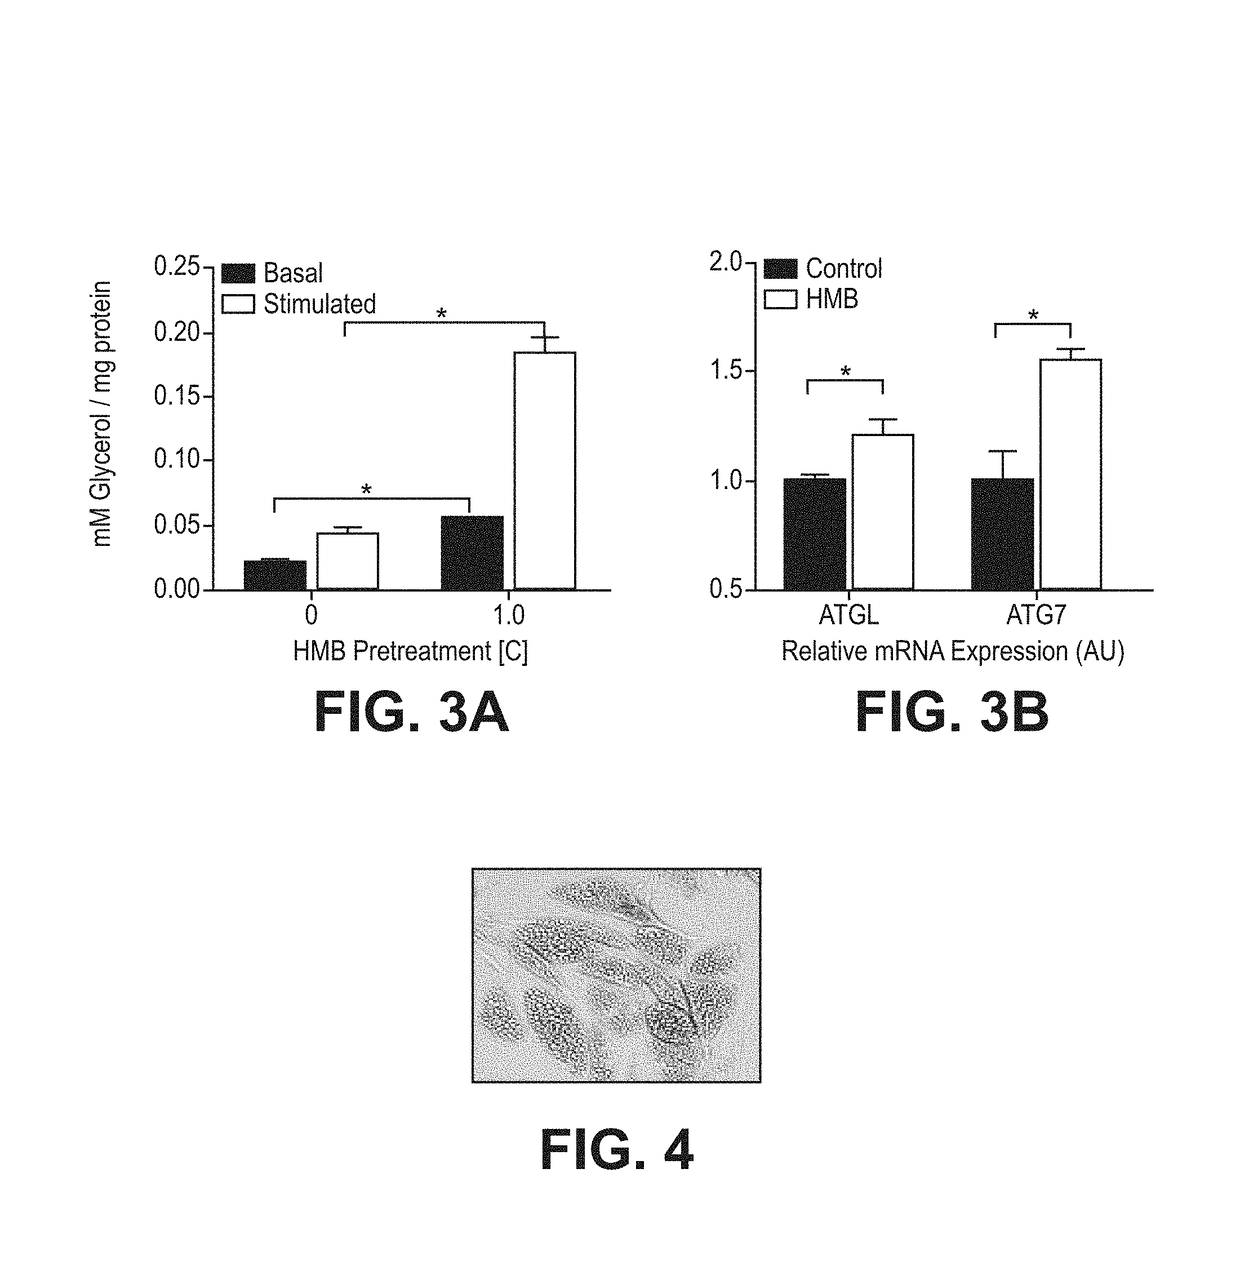 Compositions and methods of use of β-hydroxy-β-methylbutyrate (HMB) for modulating autophagy and lipophagy